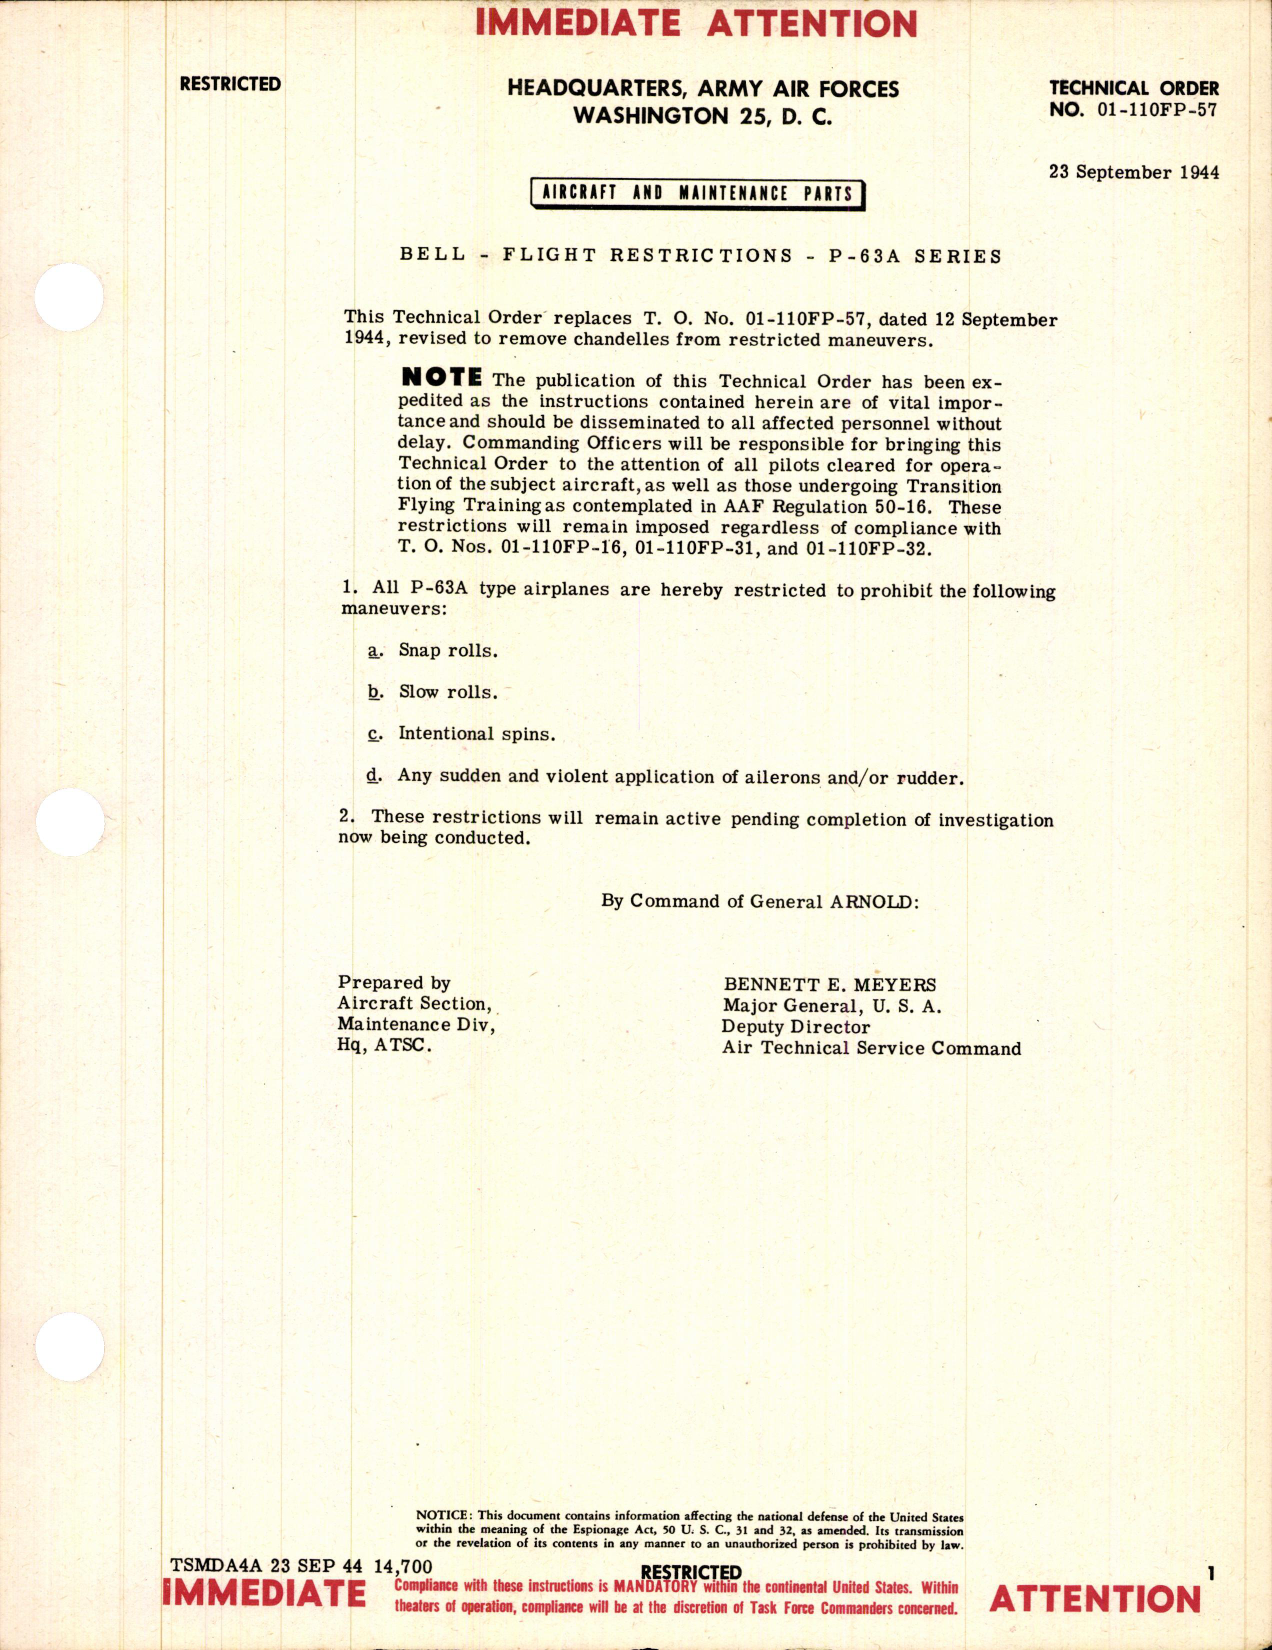 Sample page 1 from AirCorps Library document: Flight Restrictions for P-63A Series